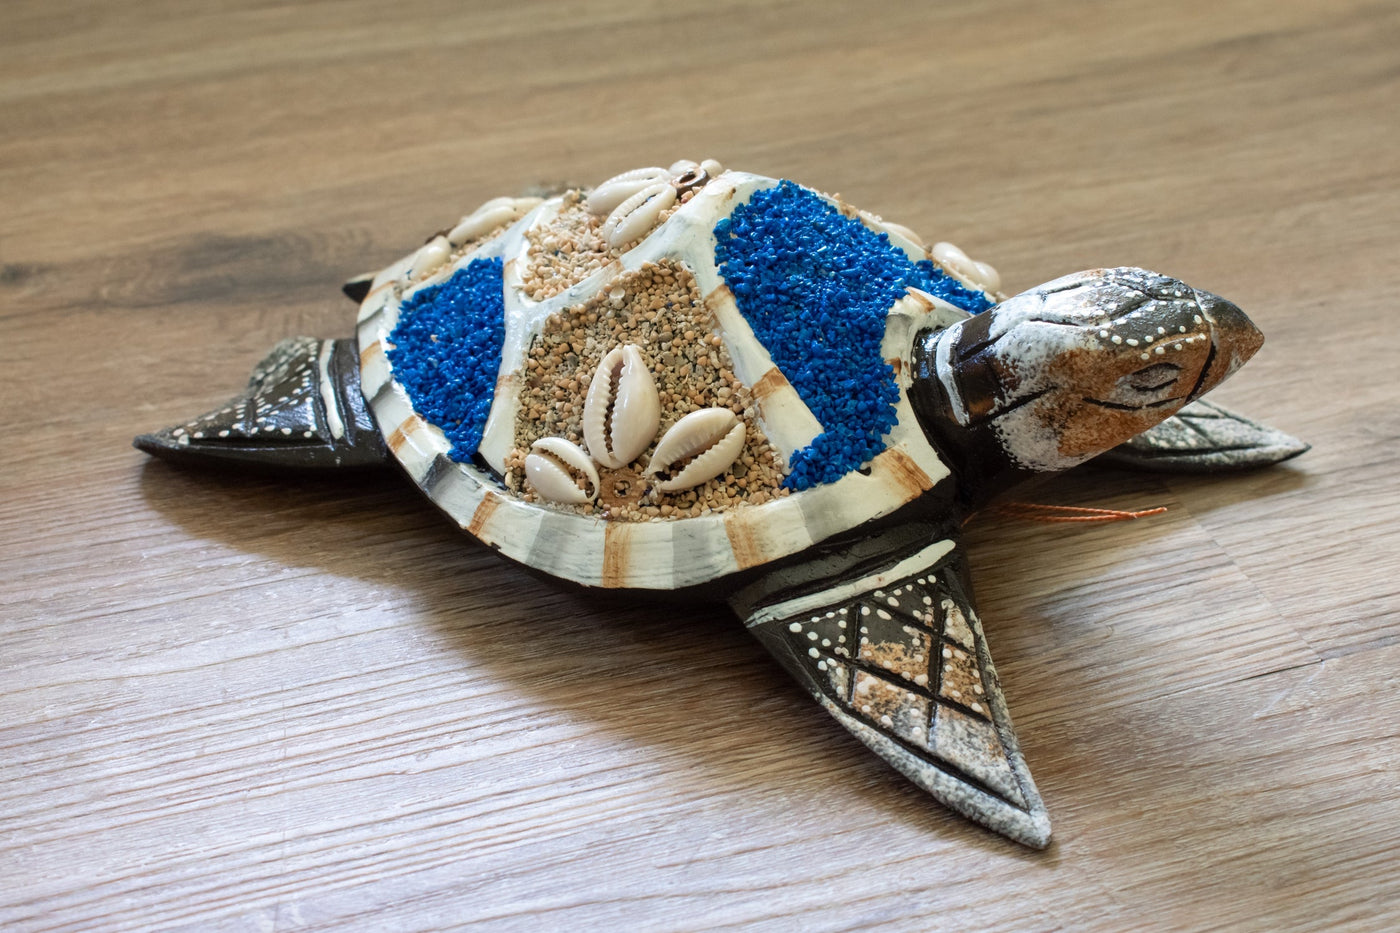 Wooden Tortoise Turtle Home Decor Sculpture Statue Hand Carved Figurine Handcrafted Wall Hanging Handmade Seaside Tropical Nautical Ocean Coastal